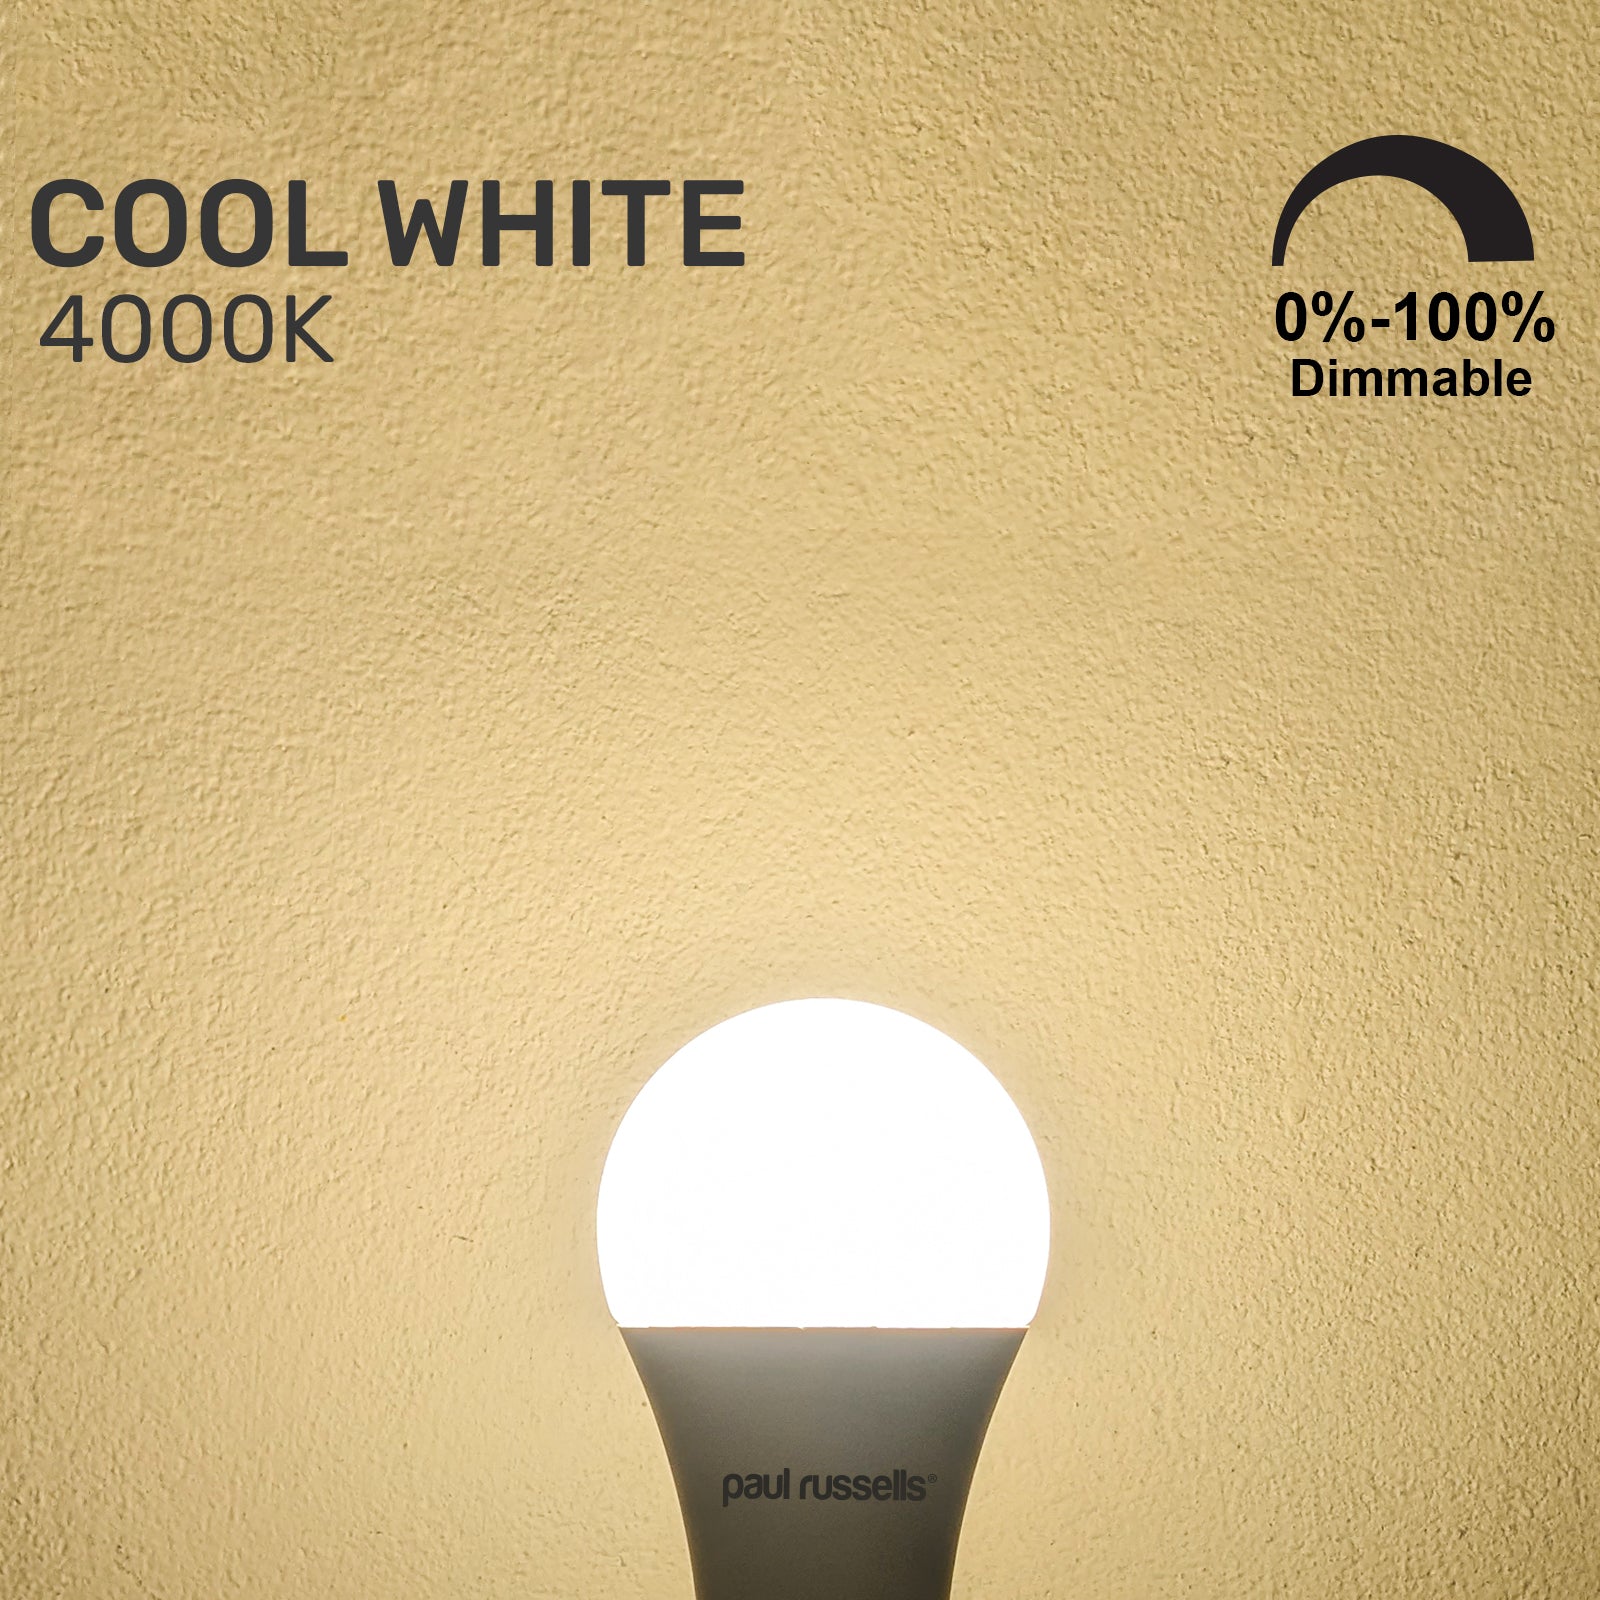 LED Dimmable GLS 14W=100W Cool White Edison Screw ES E27 Bulbs